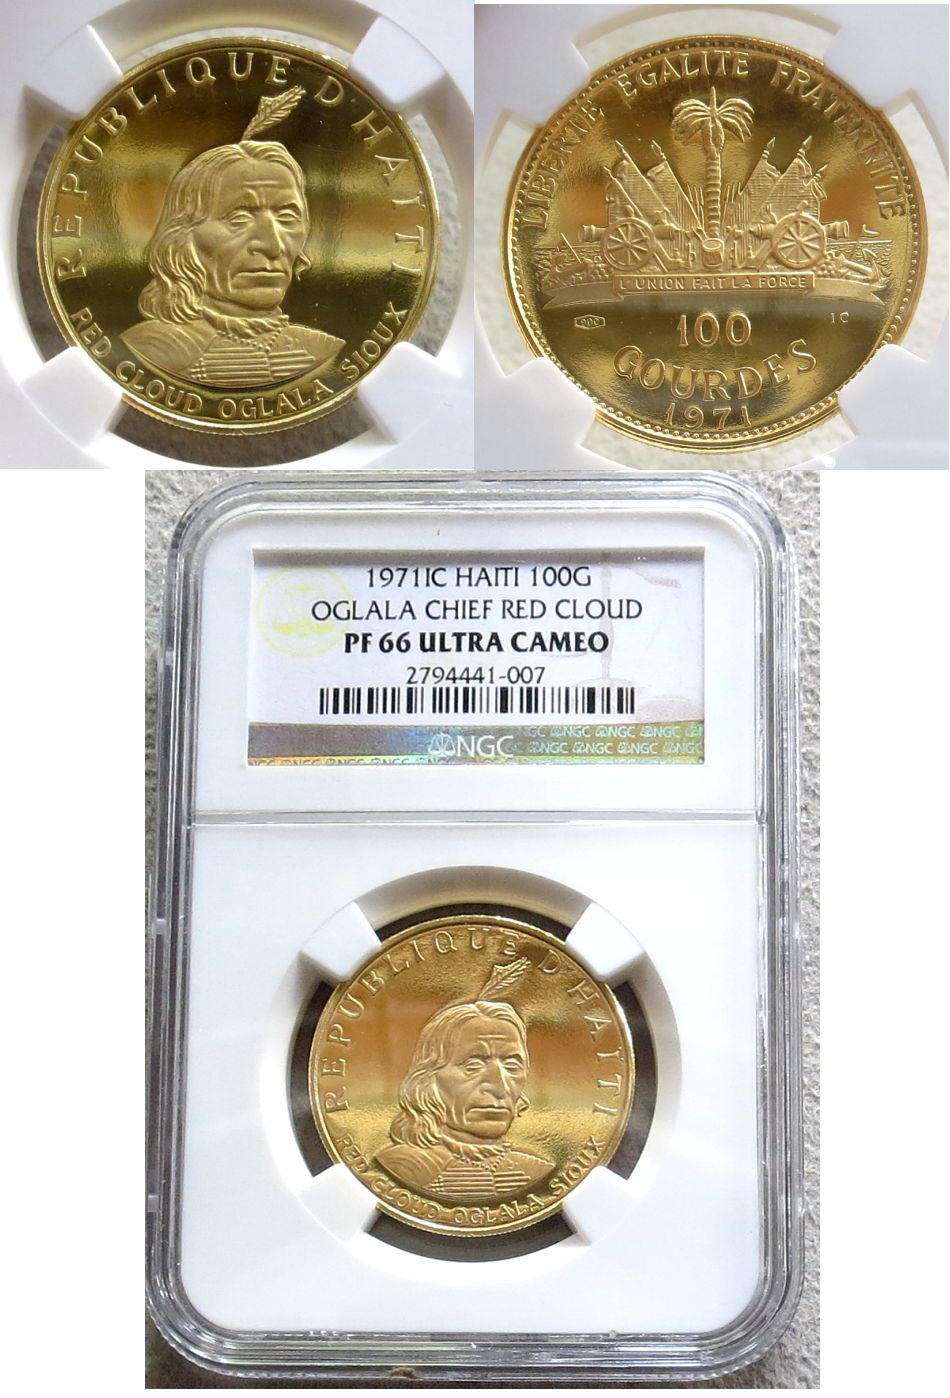 1971 GOLD HAITI 100 GOURDES NGC PROOF 66 ULTRA CAMEO "SIOUX CHIEF" ONLY 455 MINTED